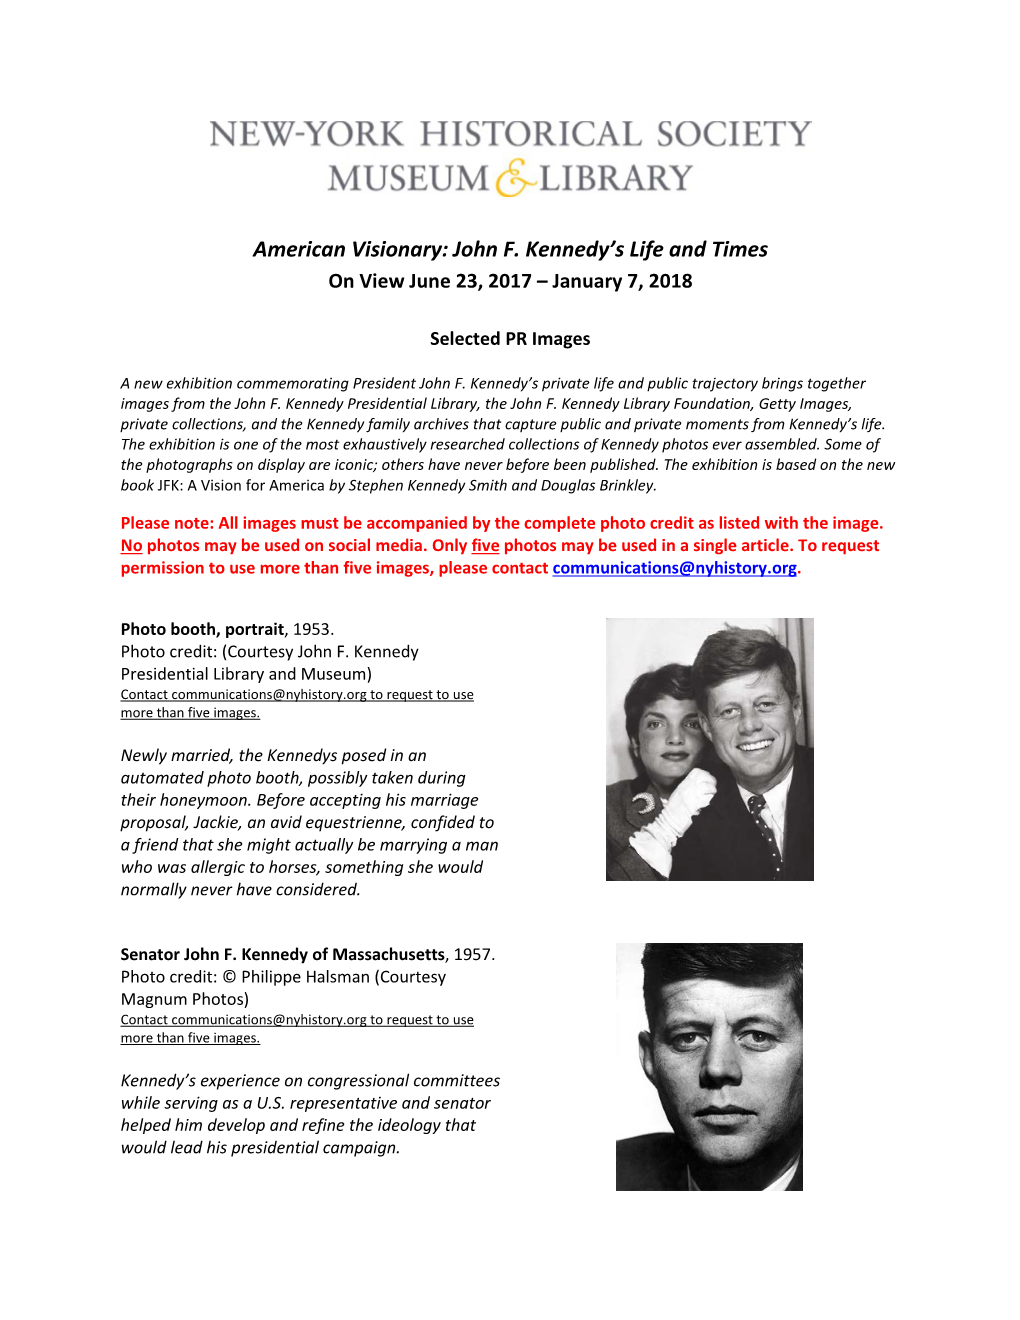 American Visionary: John F. Kennedy's Life and Times